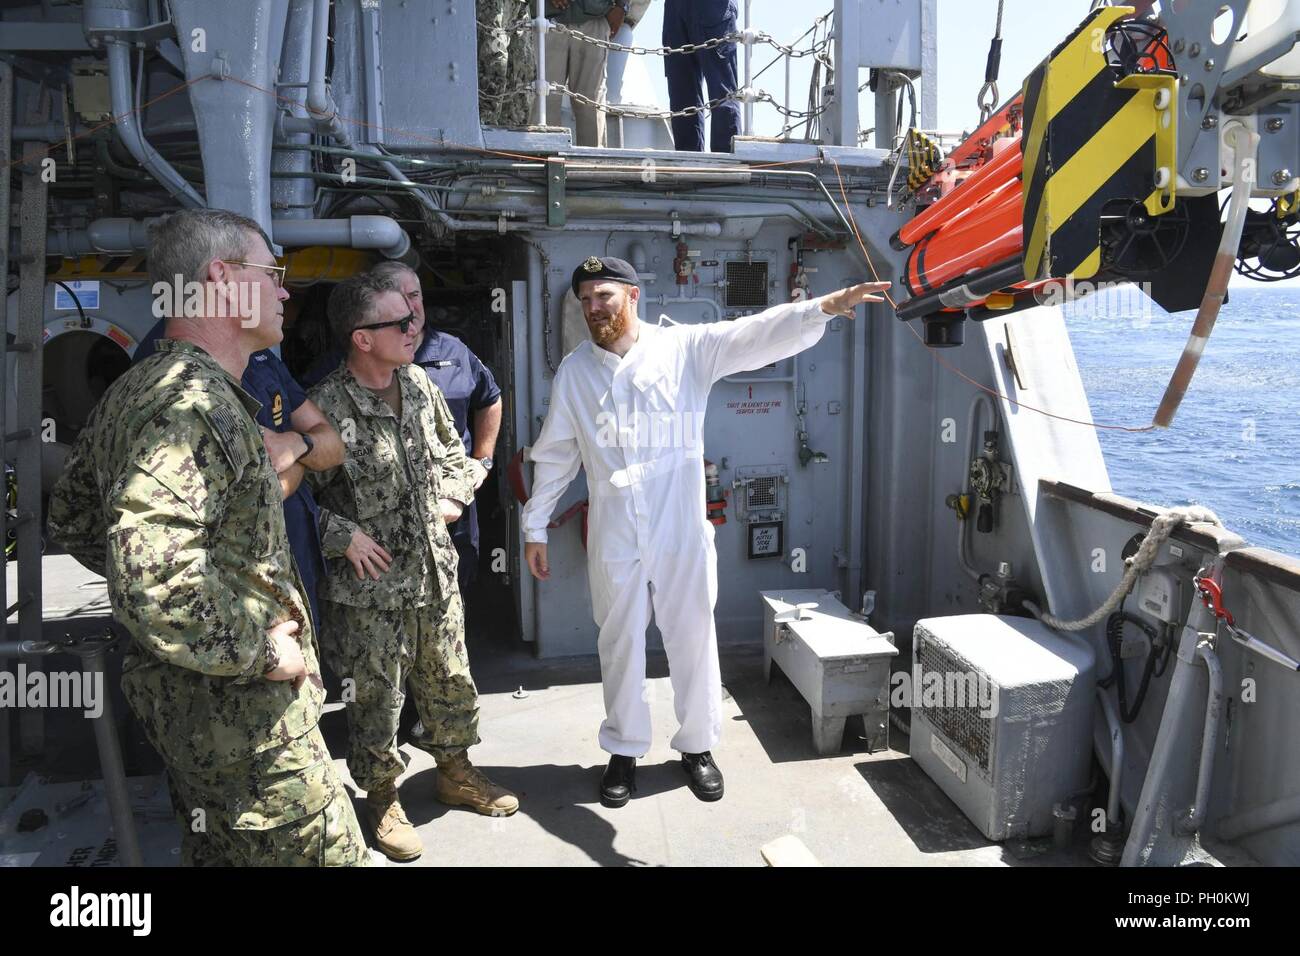 ARABIAN GULF (June 17, 2018) Lt. Tom Hasting, right, shows a Sea Fox inspection round to Vice Adm. Scott Stearney, commander of U.S. Naval Forces Central Command, U.S. 5th Fleet, Combined Maritime Forces, left, aboard HMS Middleton during Mine Countermeasures Exercise (MCMEX) 18-2. The bilateral exercise enhances cooperation, mutual MCM capabilities and interoperability between the U.S. and U.K., demonstrating the shared commitment of ensuring unfettered operations of naval and support vessels, as well as commercial shipping movements, throughout the maritime domain. Stock Photo